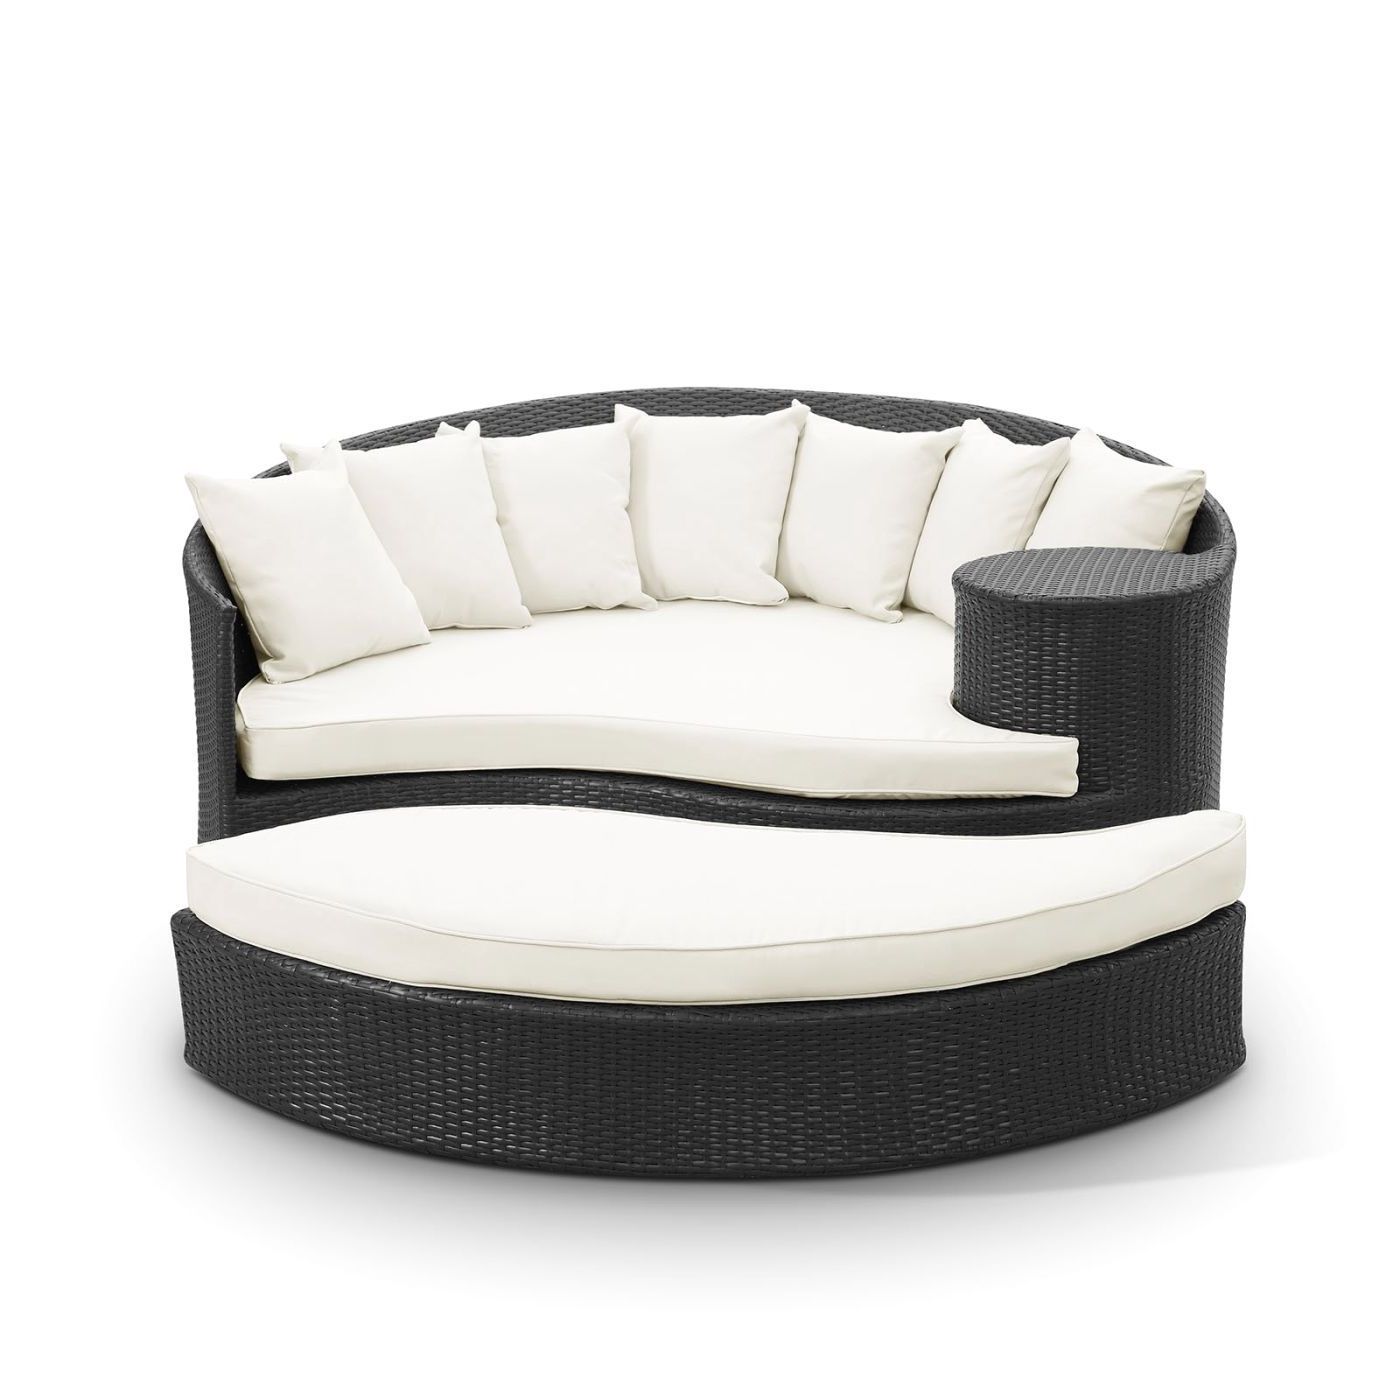 Fashionable Ellanti Patio Daybeds With Cushions Regarding Furniture: Cool Patio Daybed With Alluring Cushions For (View 14 of 25)